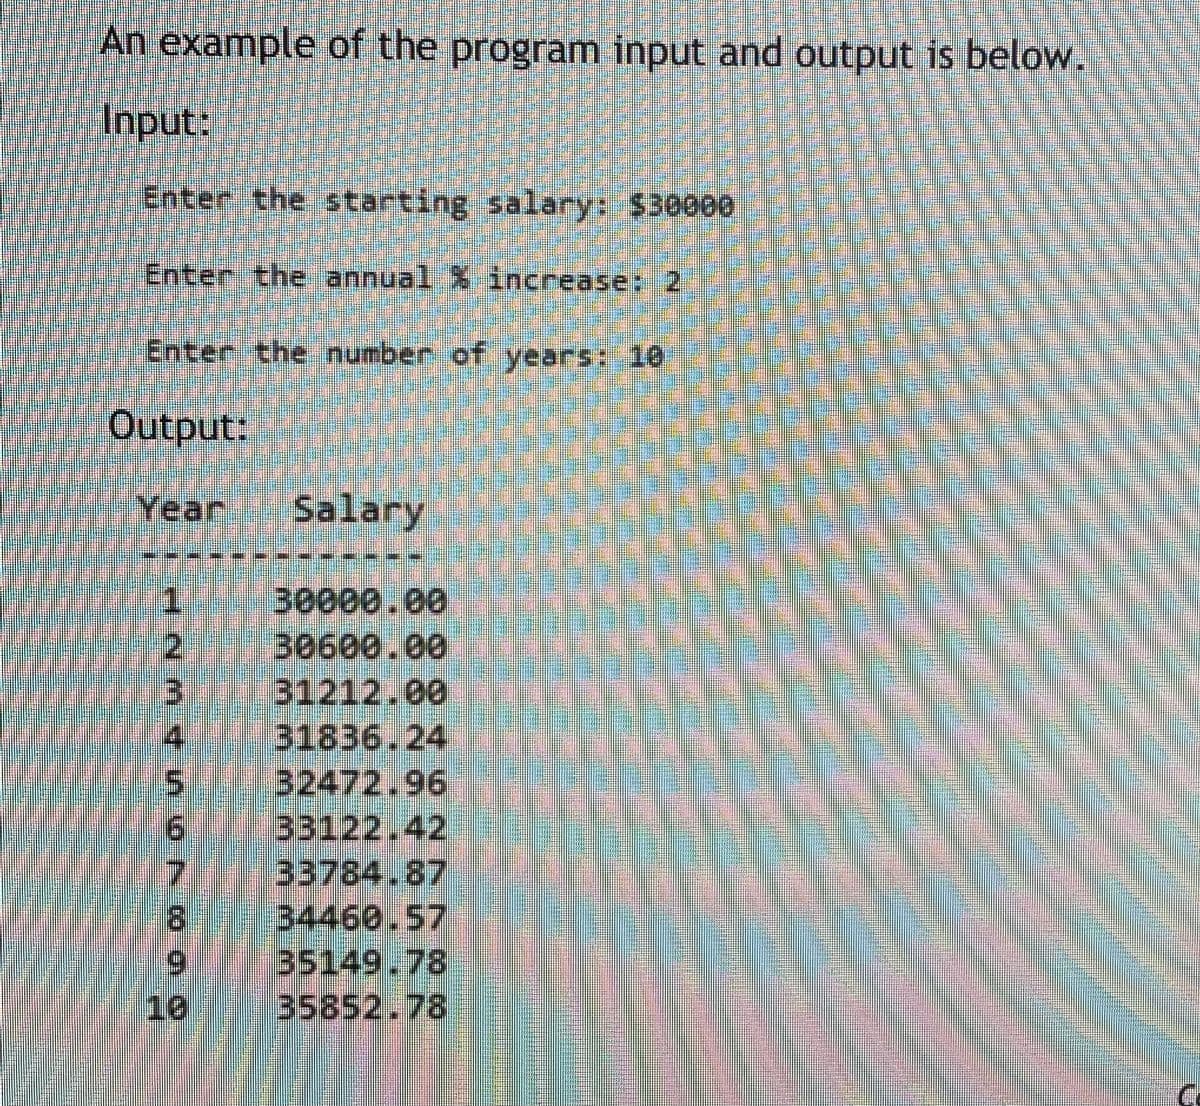 An example of the program input and output is below.
Input:
Enter the starting salary: $30000
Enter the annual % increase: 2
Enter the number of years: 10
Output:
Year
Salary
1.
2.
30000.00
30600.00
31212.00
31836.24
32472.96
33122.42
33784.87
34460.57
35149.78
35852.78
4.
7.
8.
6.
10
